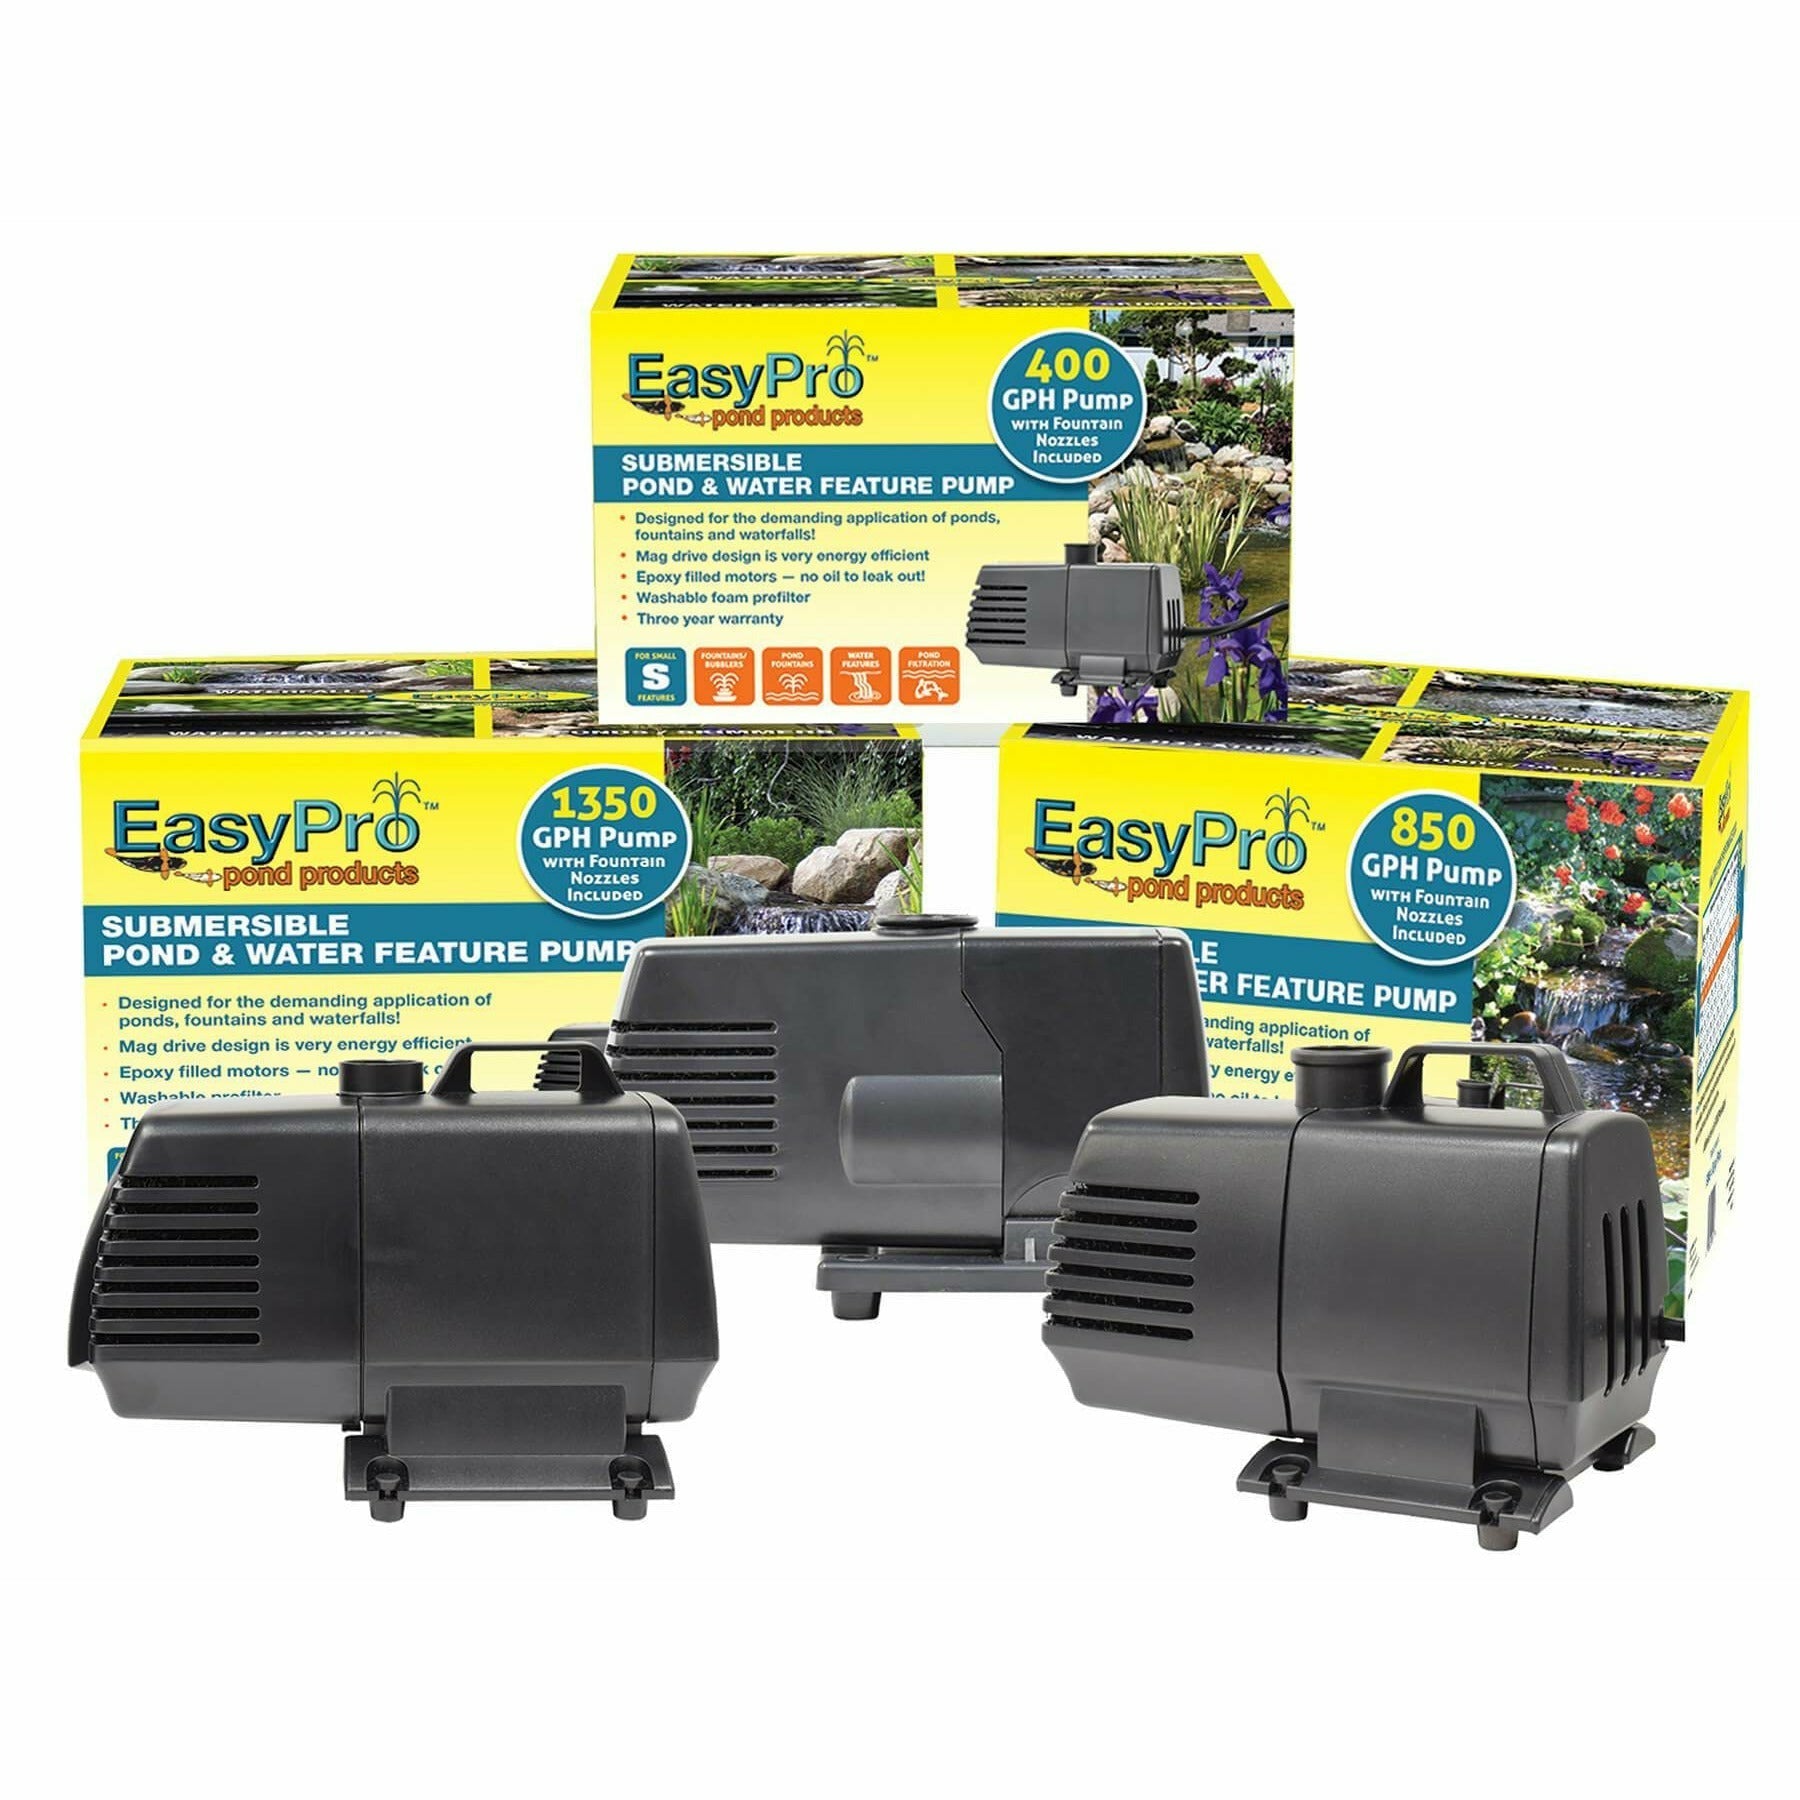 EP400 Submersible Mag Drive Pond Pump 400 GPH | Reliable | Quiet & Energy Efficient - American Pond Supplies Easy Pro Mag Drive Pumps Mag Drive Pumps